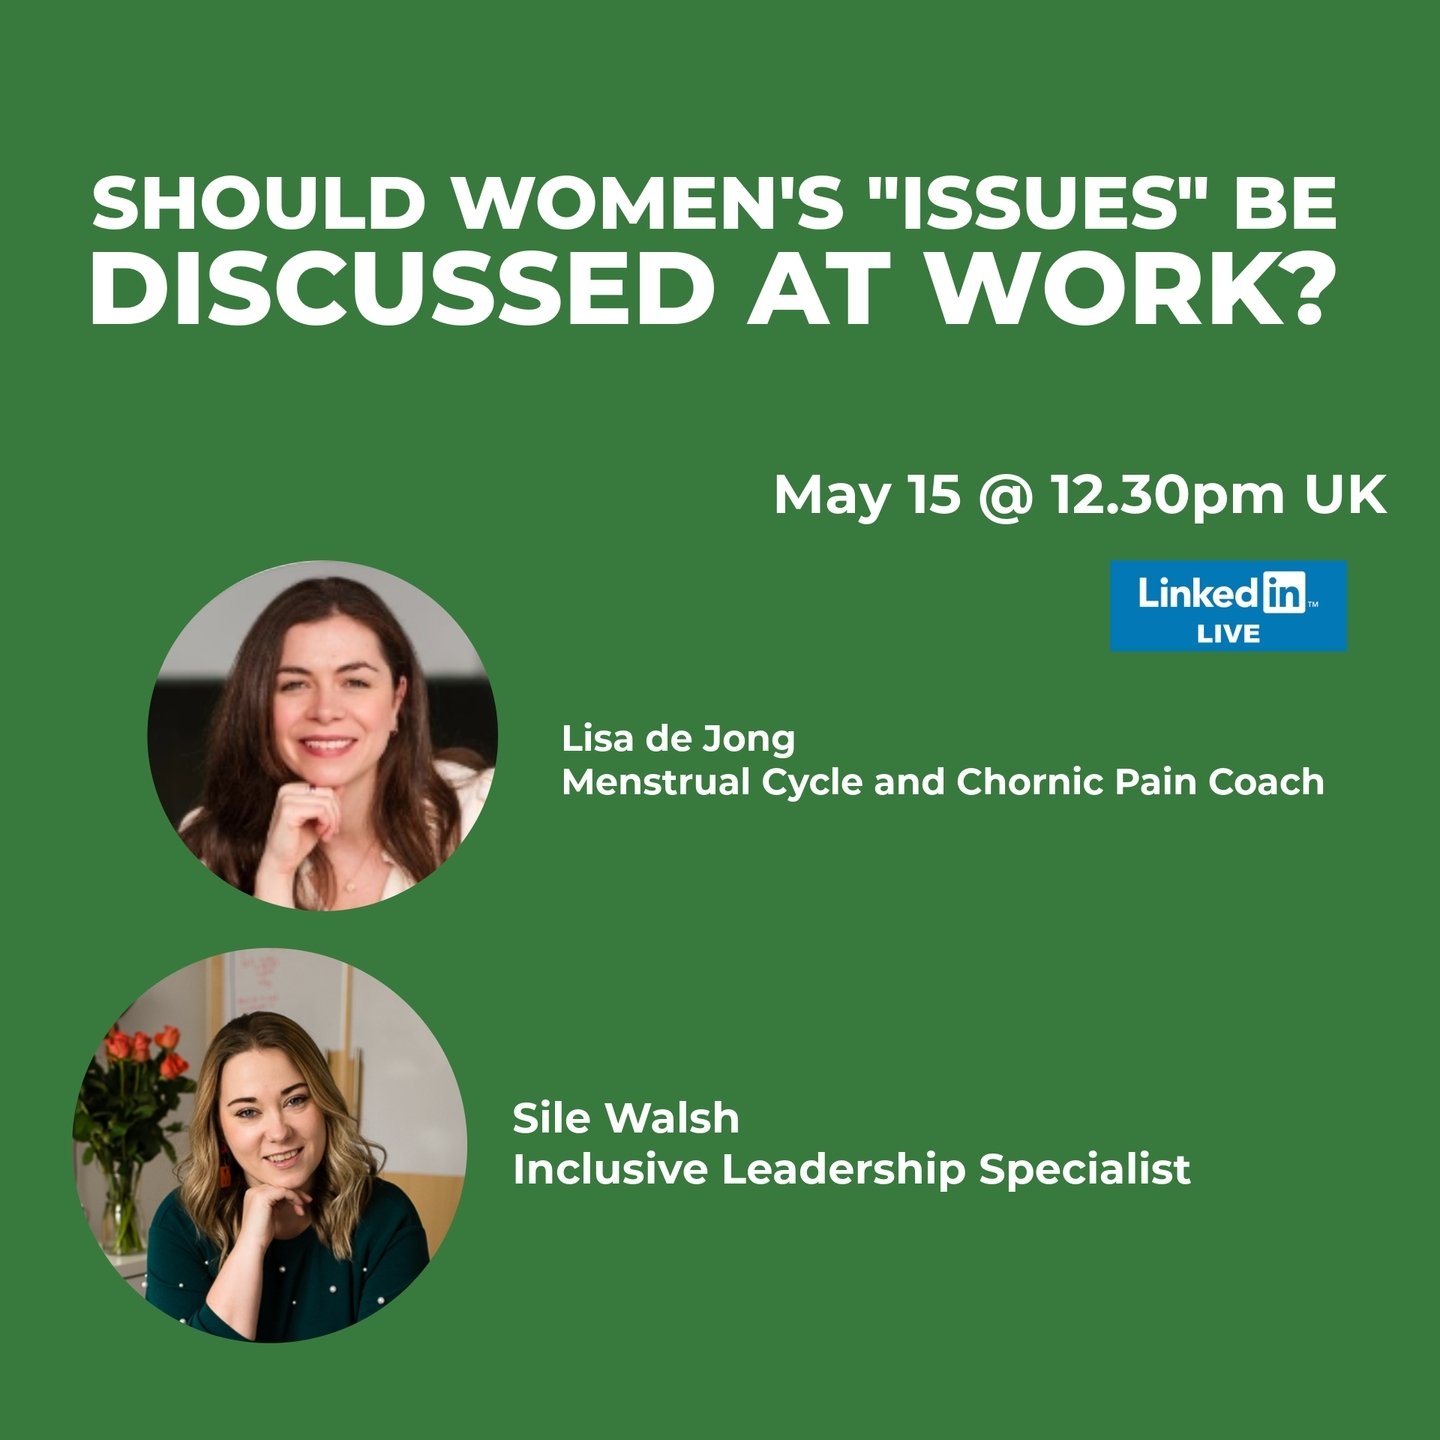 Join @LisadeJong and I as we discuss &quot;Should women's &quot;issues&quot; be discussed at work?&quot; live on May 15th at 12.30pm Irish time.

Join us on any of the following channels
LinkedIn: www.linkedin.com/in/silewalsh/
Facebook: www.facebook